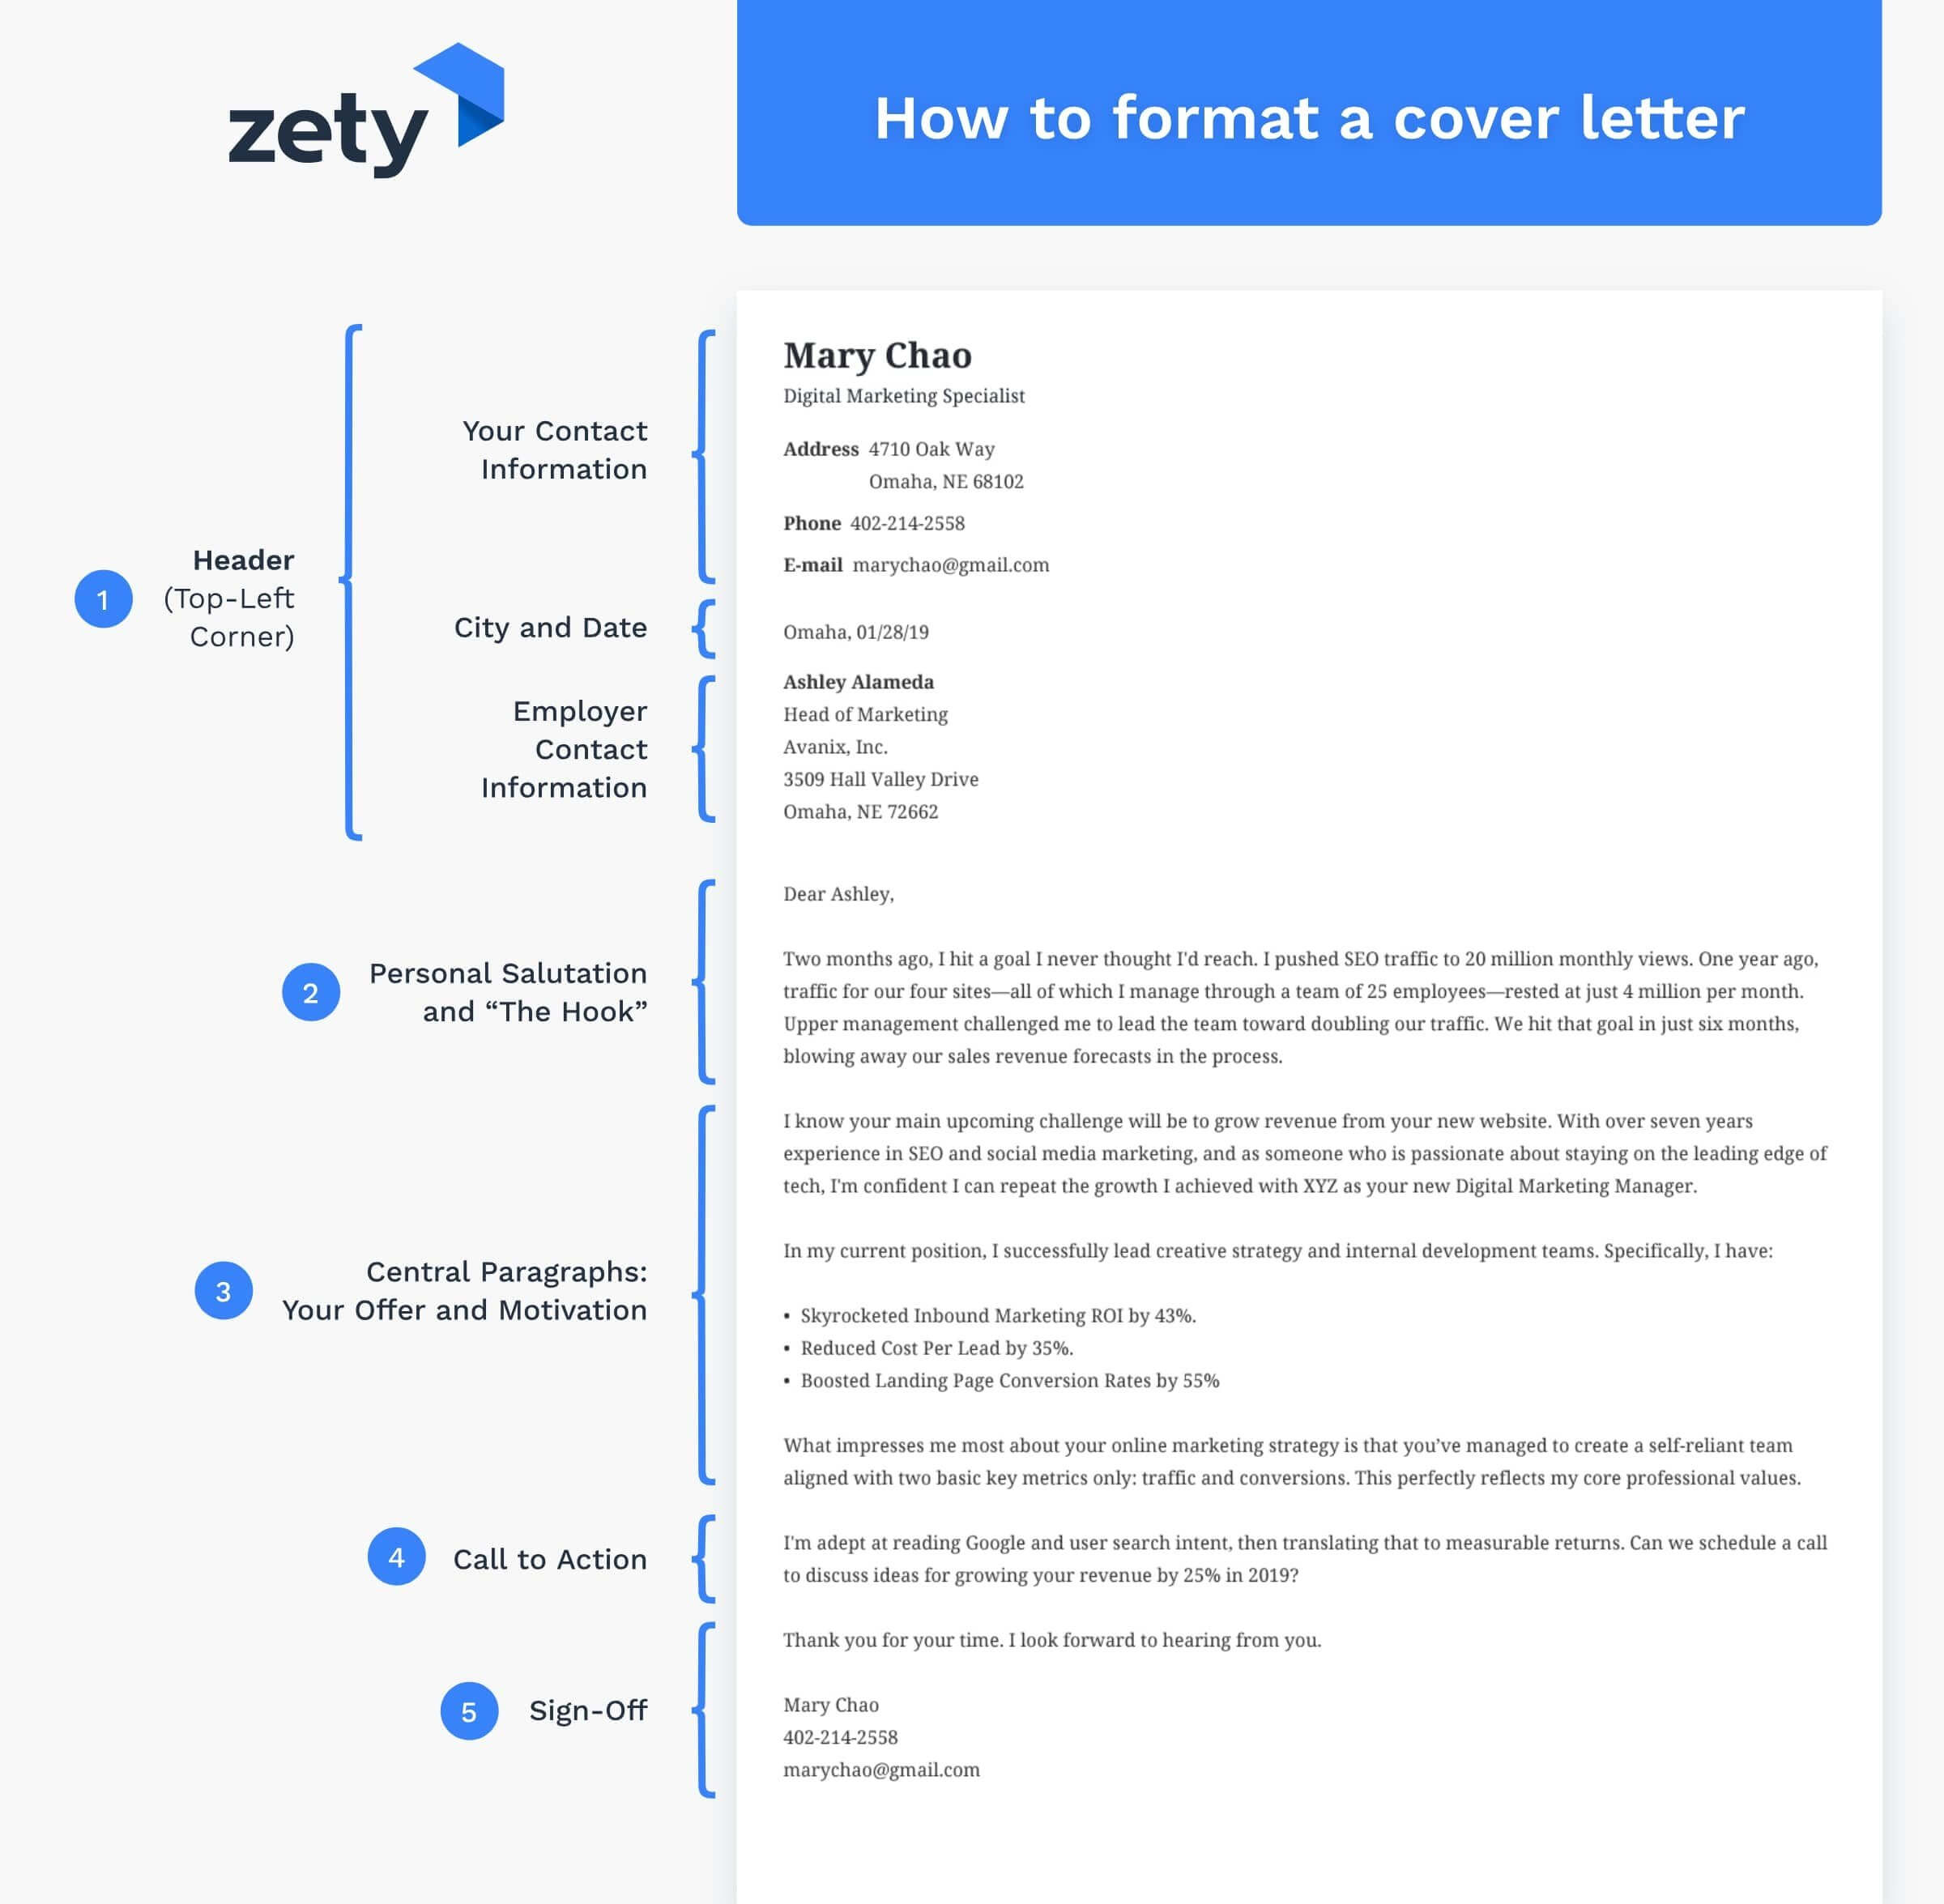 How To Format A Cover Letter For A Job Application: Layout Tips Intended For 4 Inch Letter Template